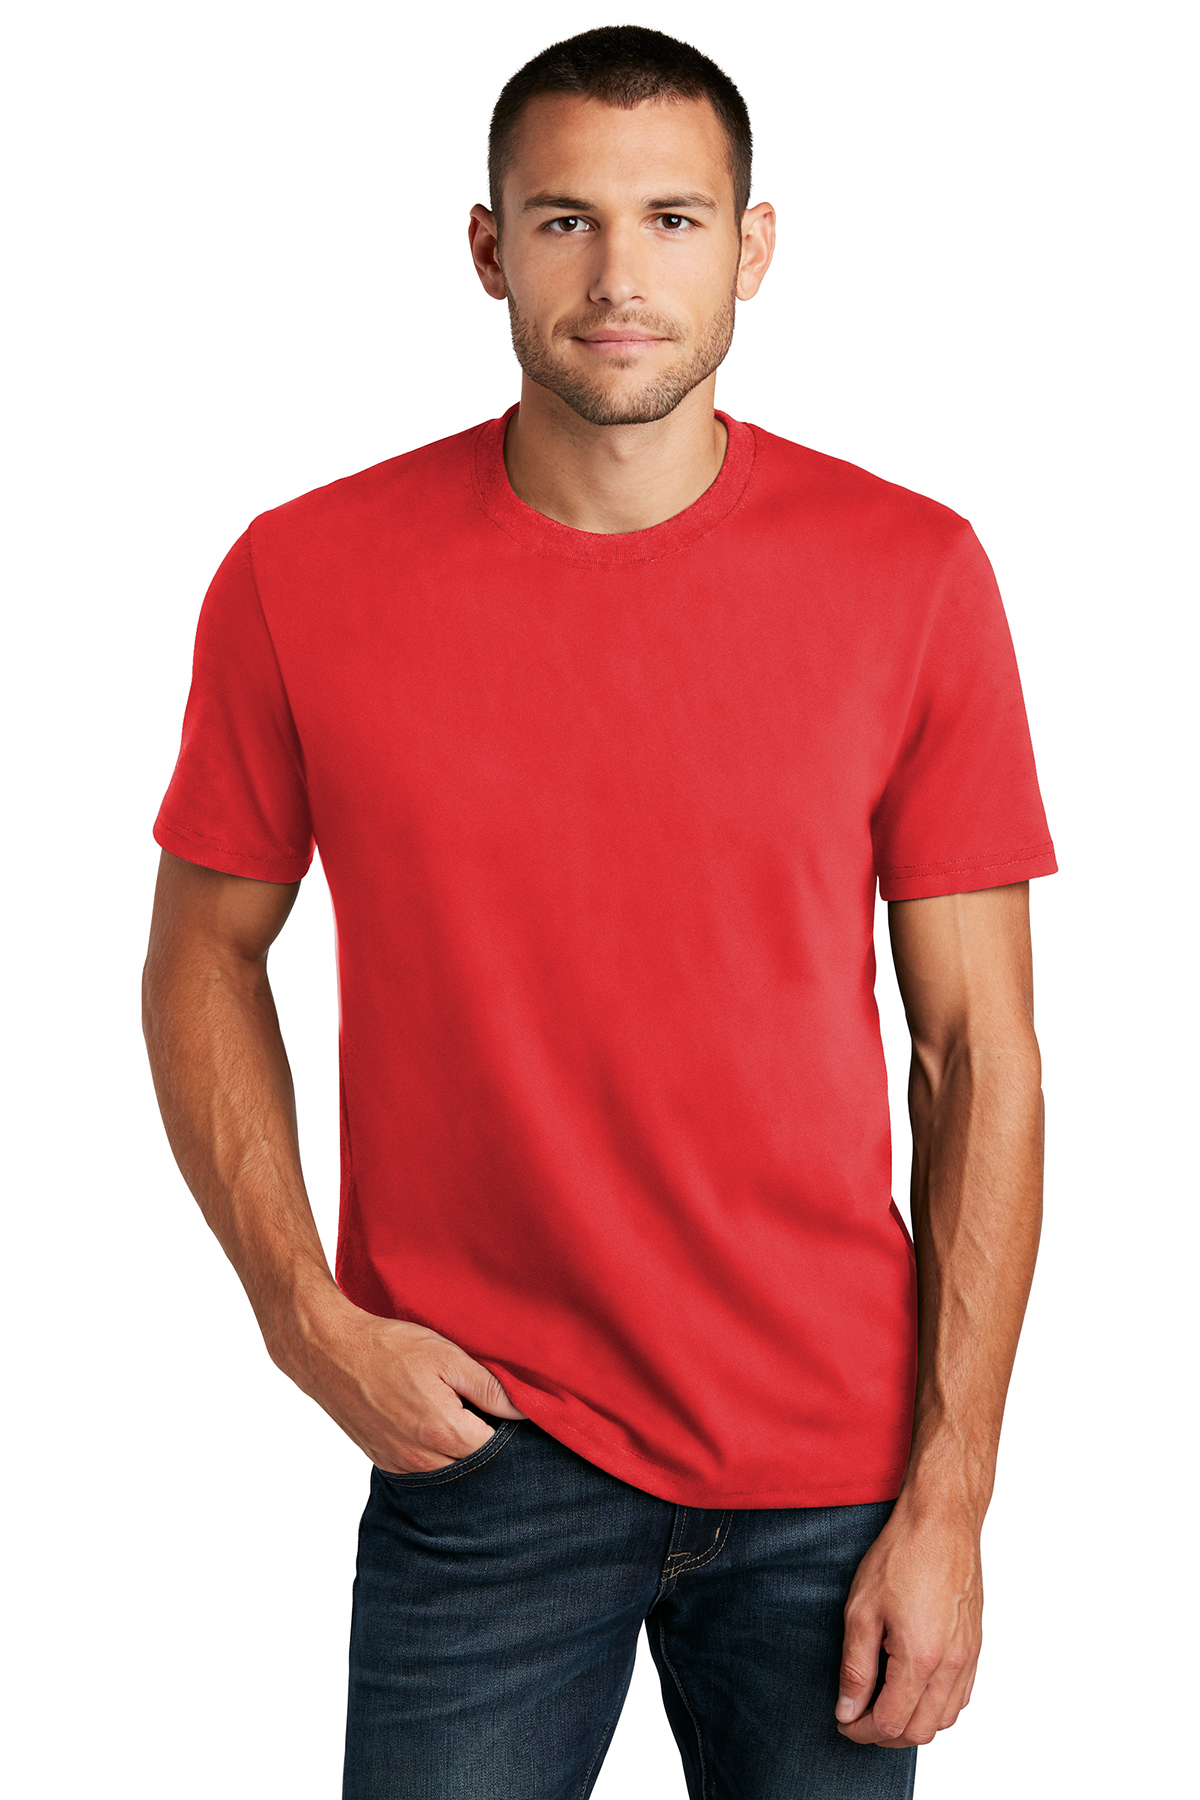 ruby red t shirts